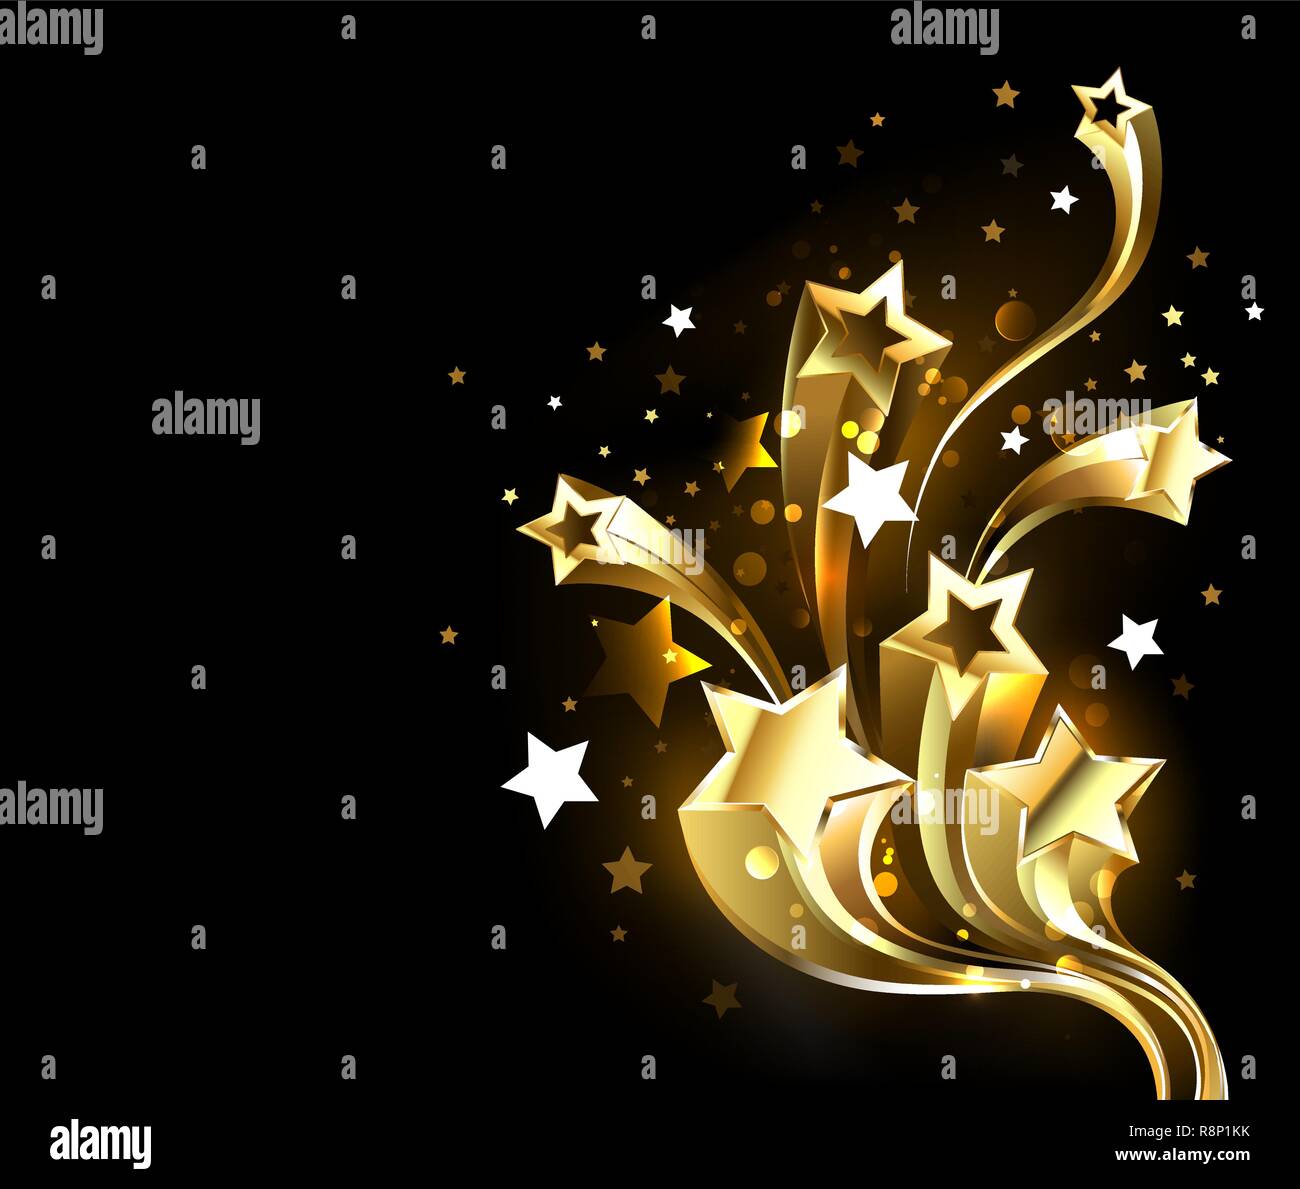 Golden, shiny comet with flexible tail on black background. Stock Vector